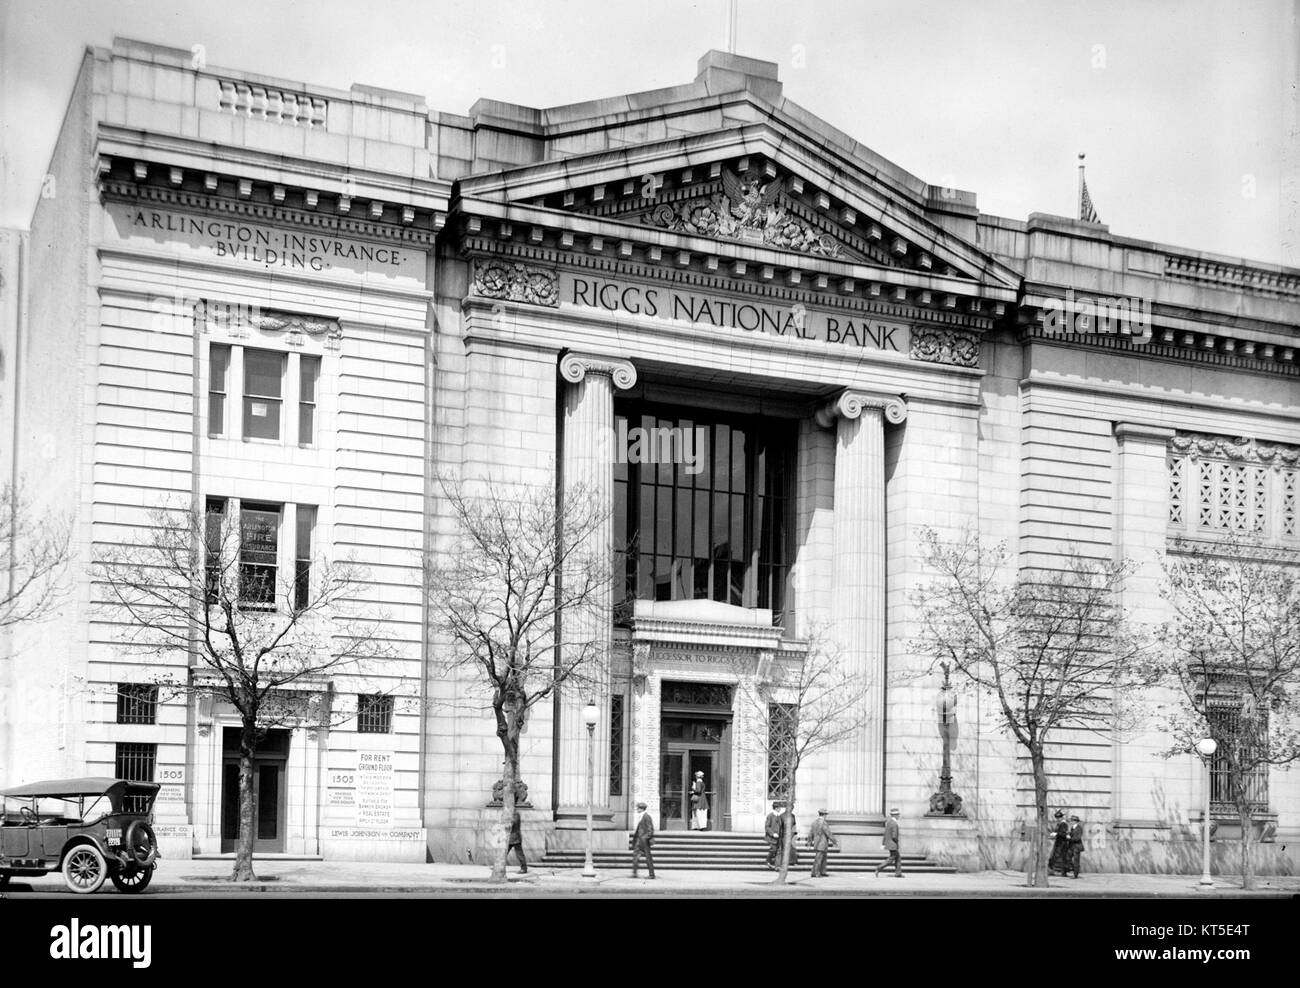 Riggs National Bank In 1915 Stock Photo Alamy